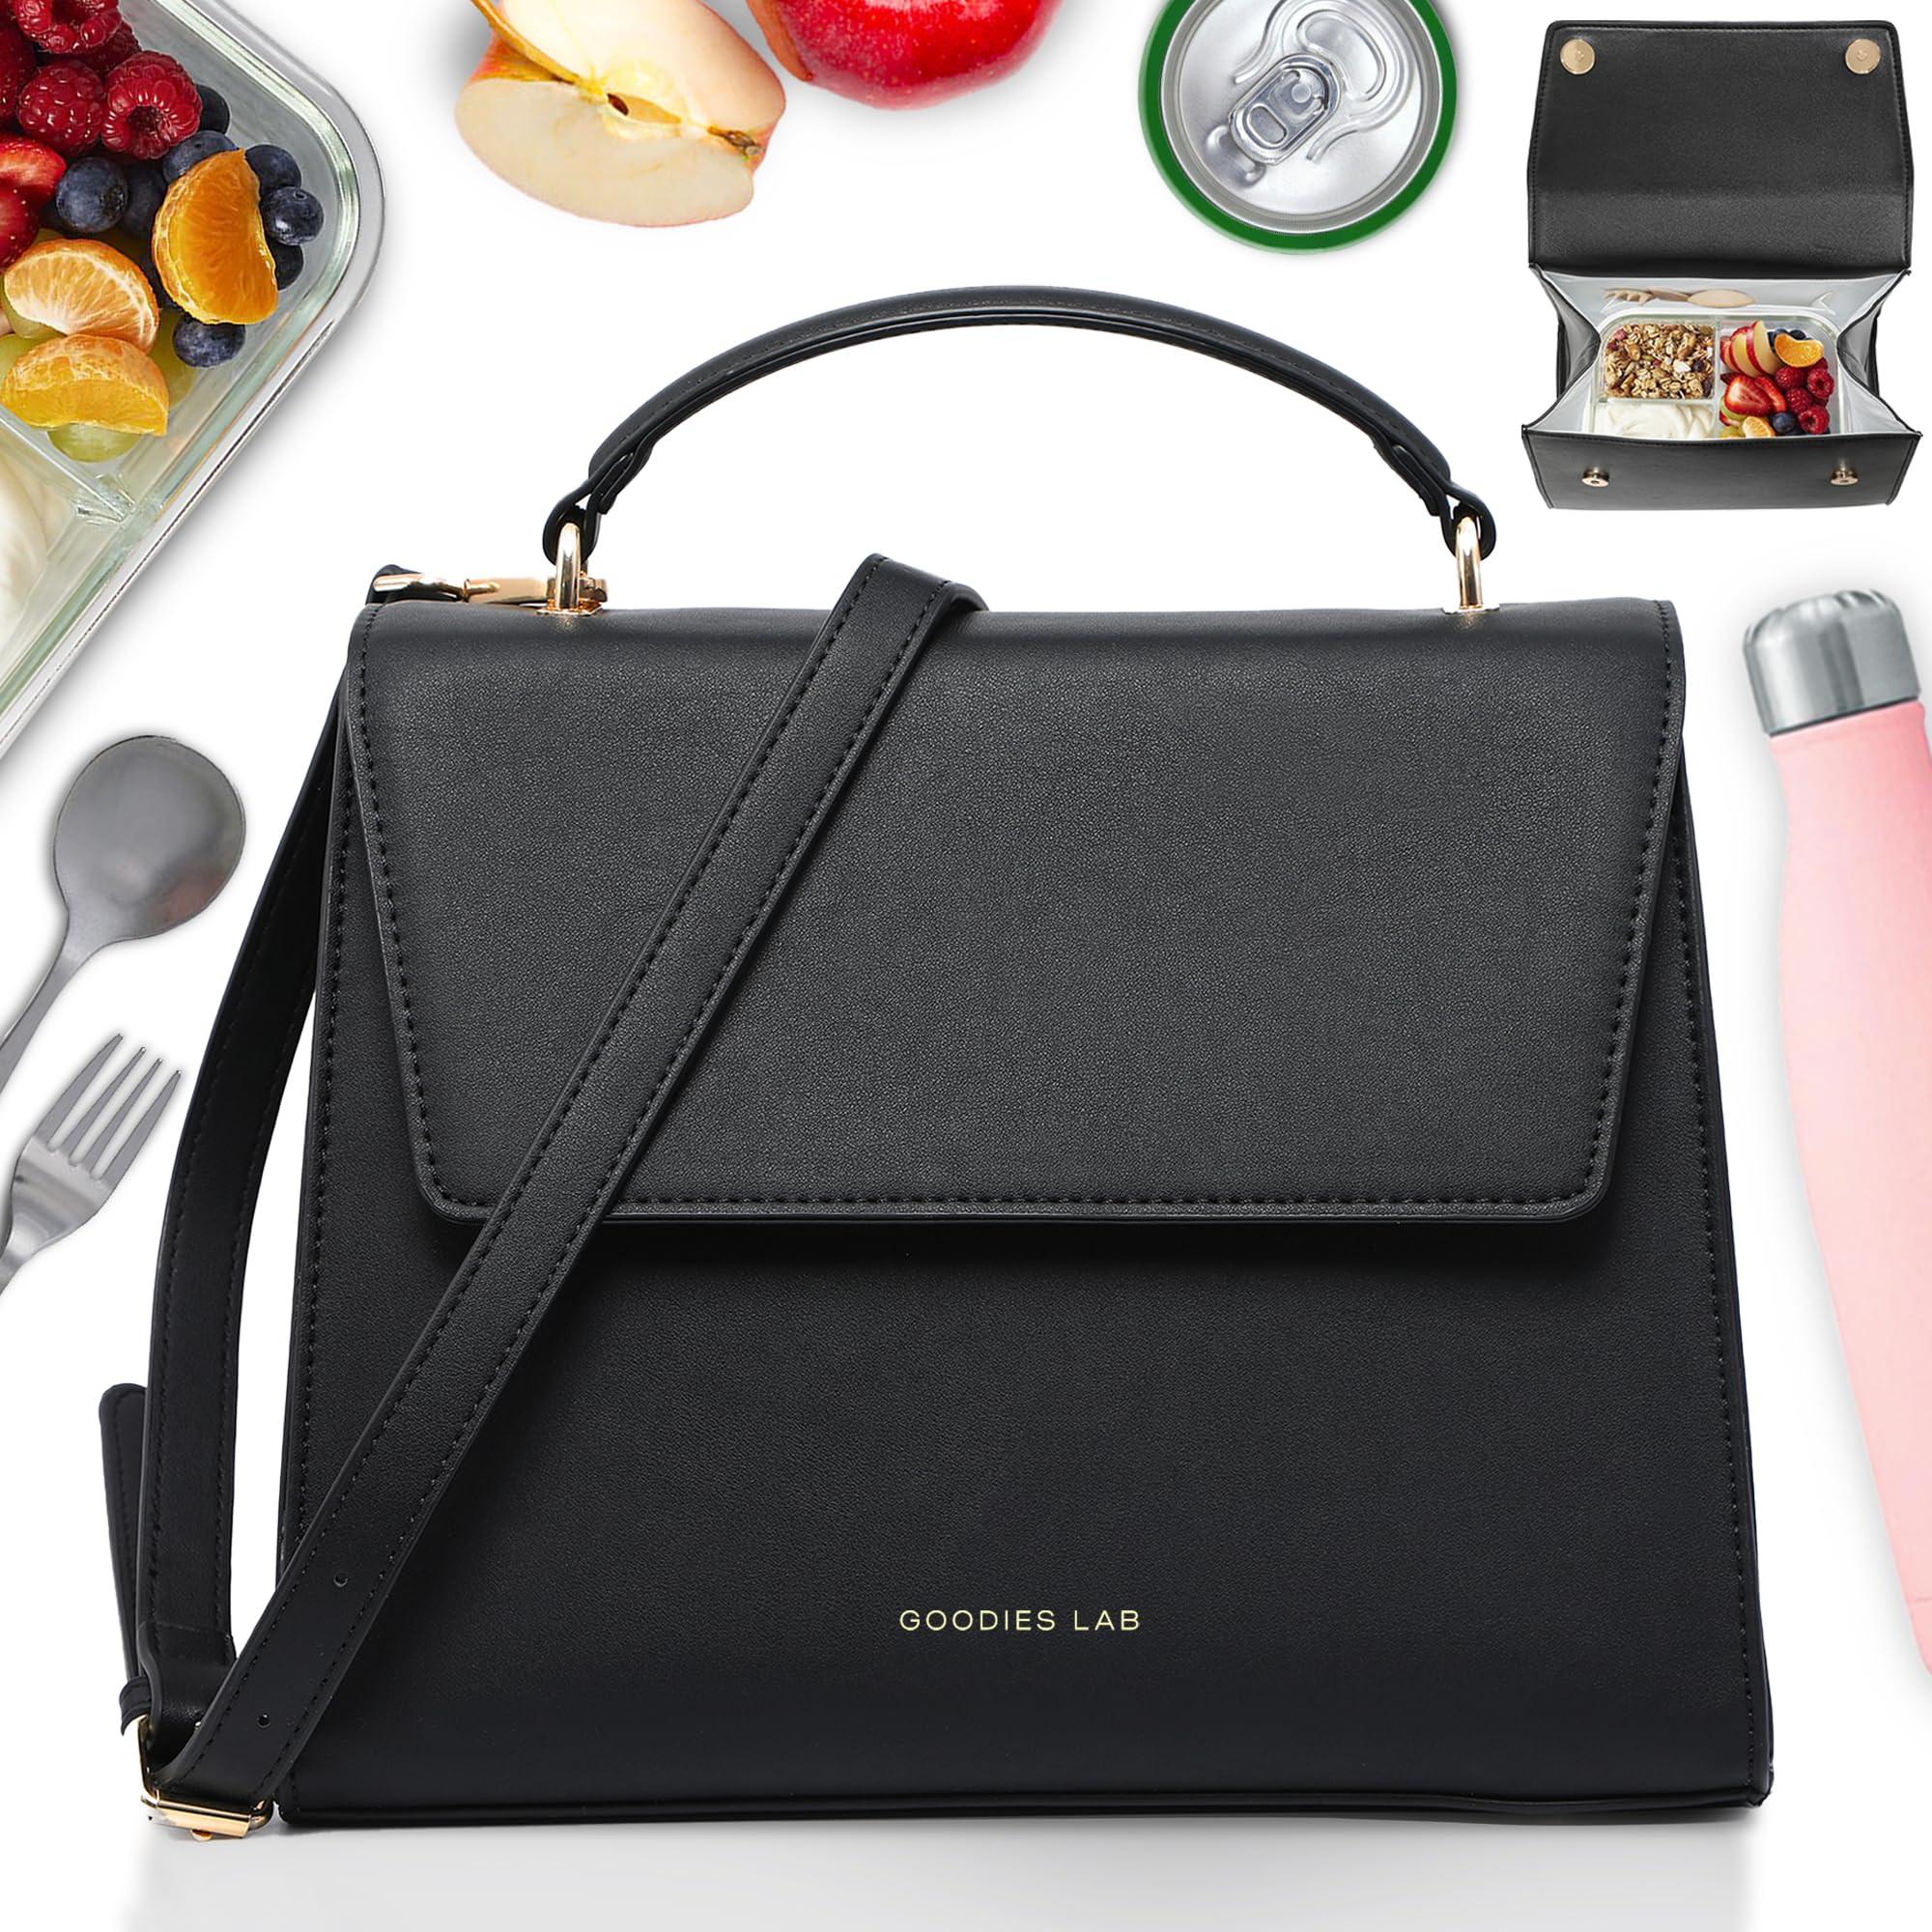 BeautyGoodies Lunch Bag Women Insulated Lunch Bag Purse, Leather Lunch Bag for Women, Lunch Box Purse Modern, Stylish Lunch bag for Women Black, Cute Fancy Lunch bag Women for Work Designer Lunch Tote